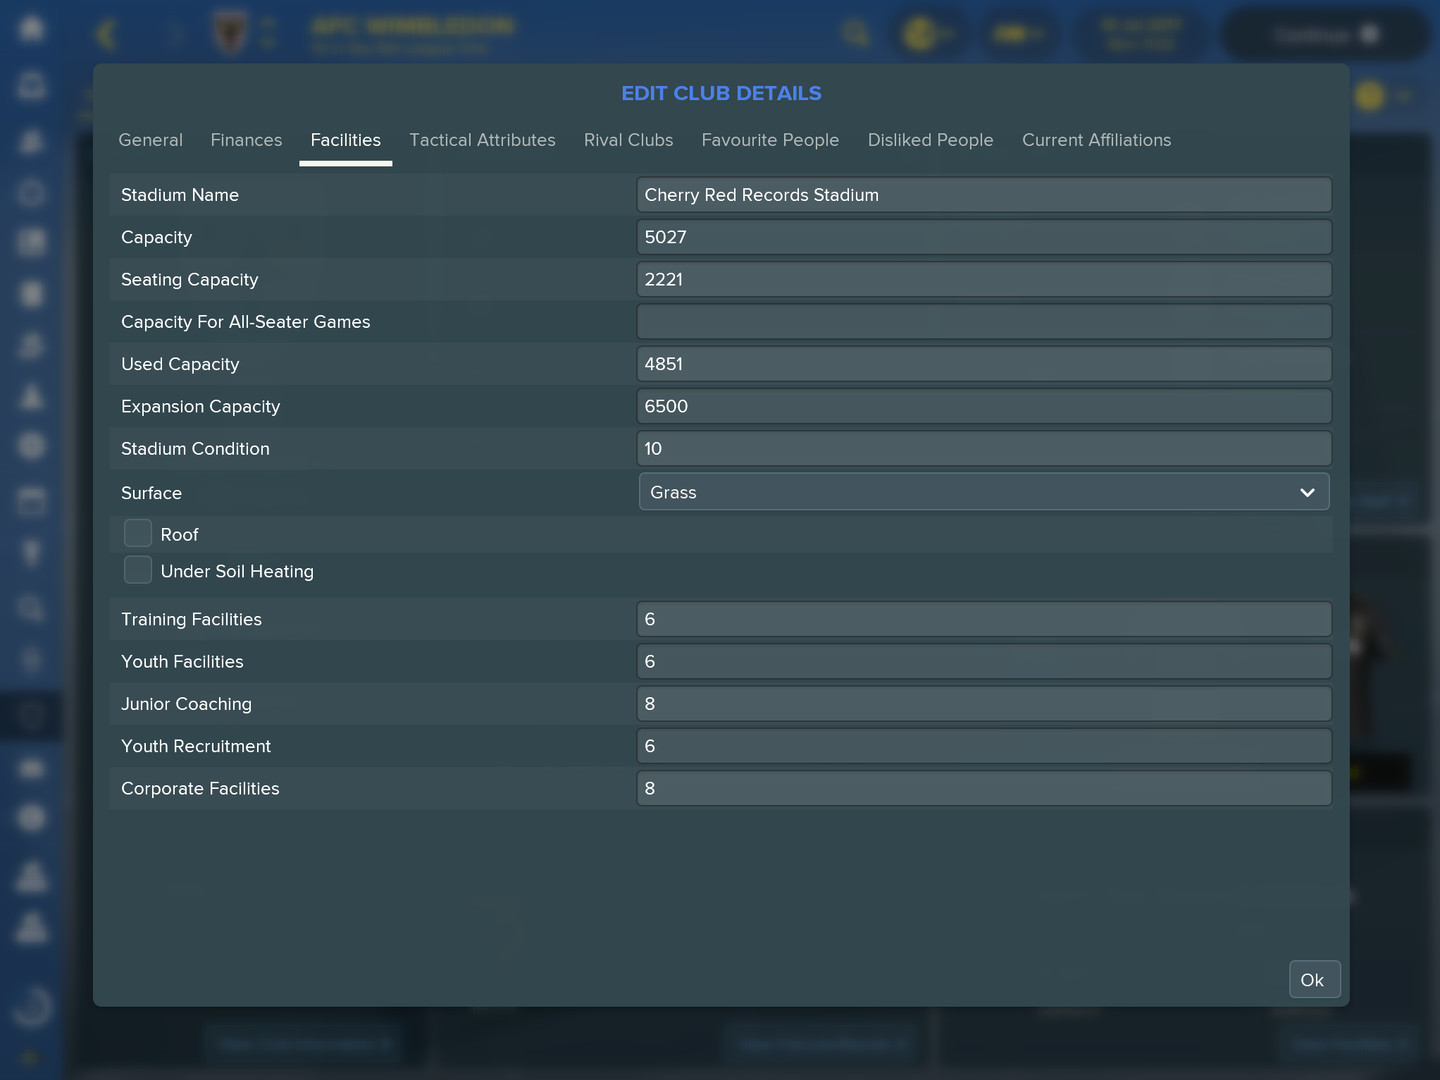 football manager 2013 real time editor